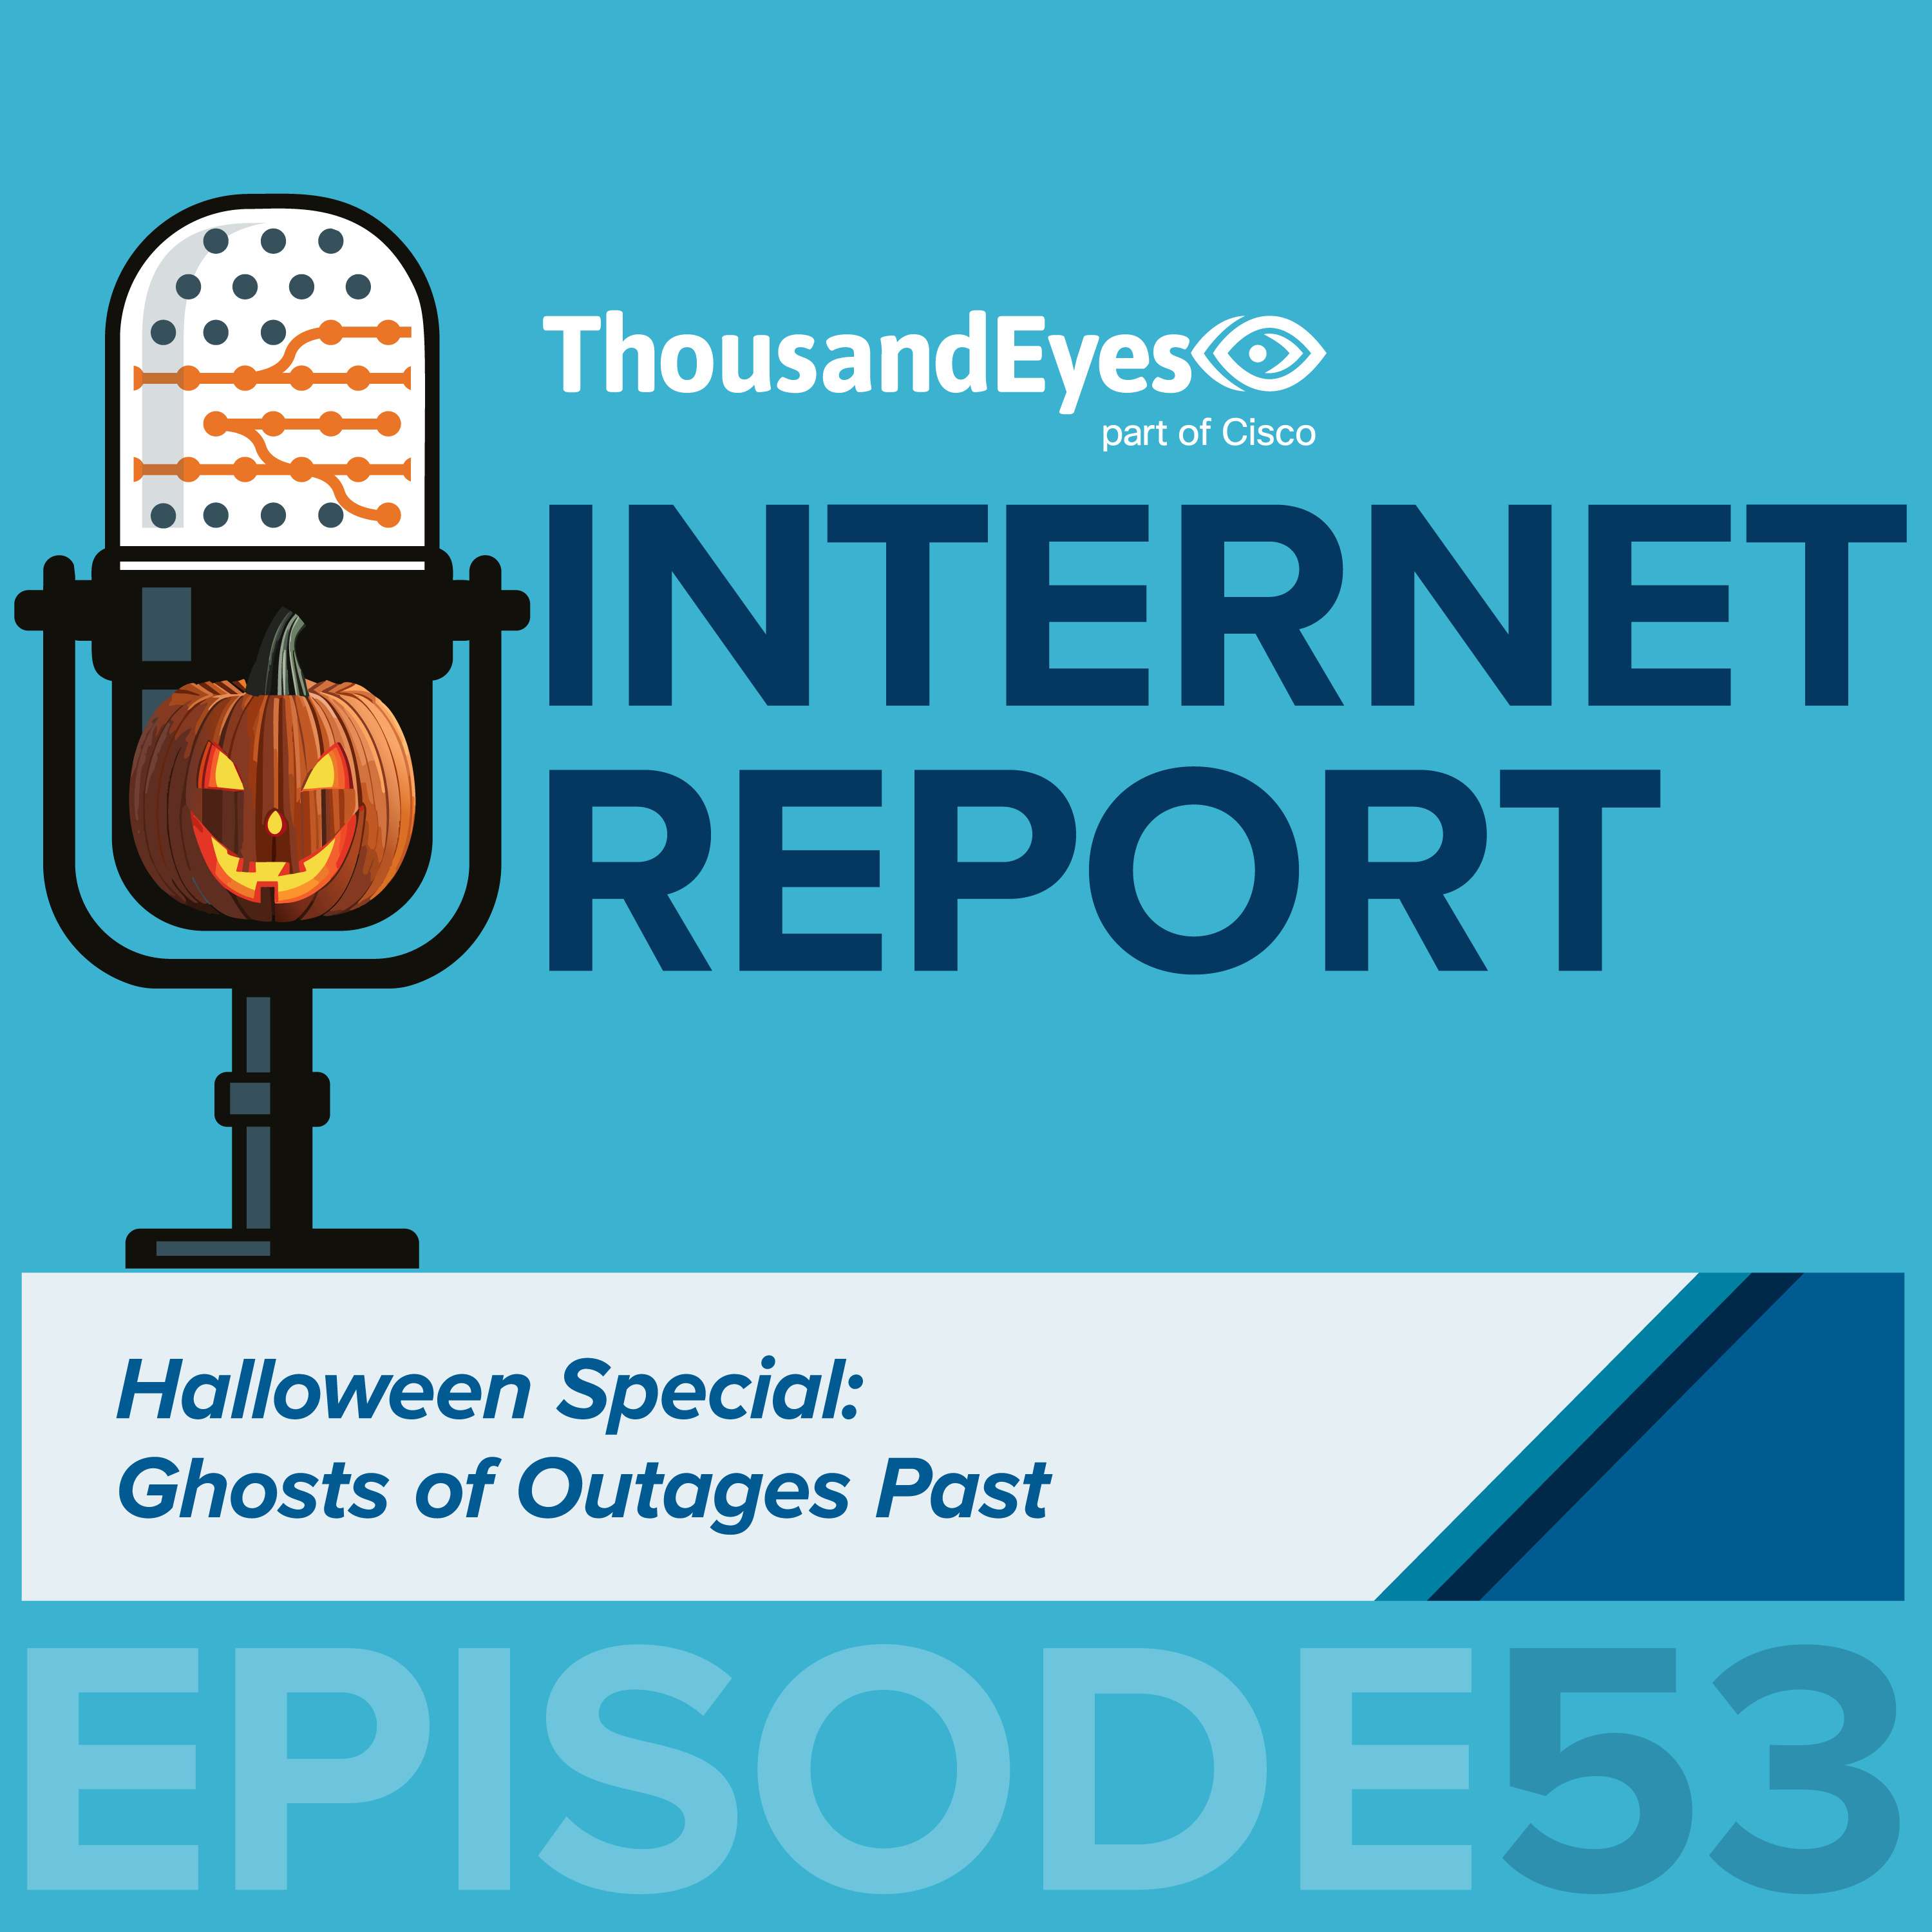 Halloween Special: Ghosts of Outages Past